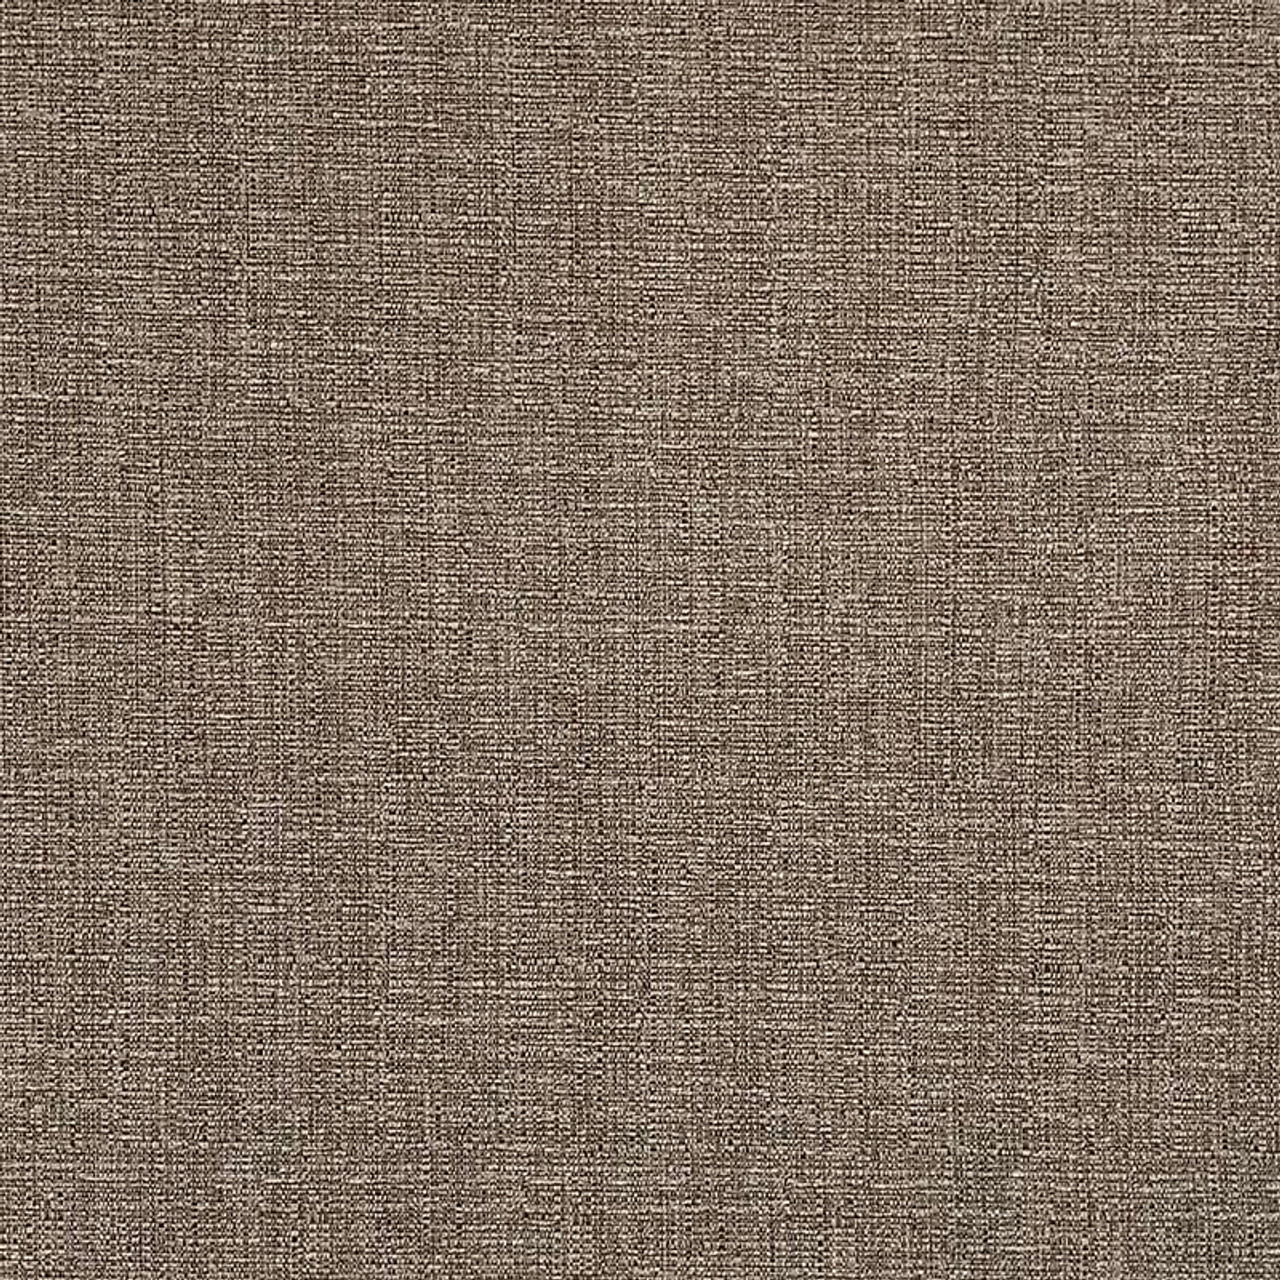 8642 | Crypton Home Cody Sandstone, Beige Solid/Plain Upholstery - Mag  Fabrics